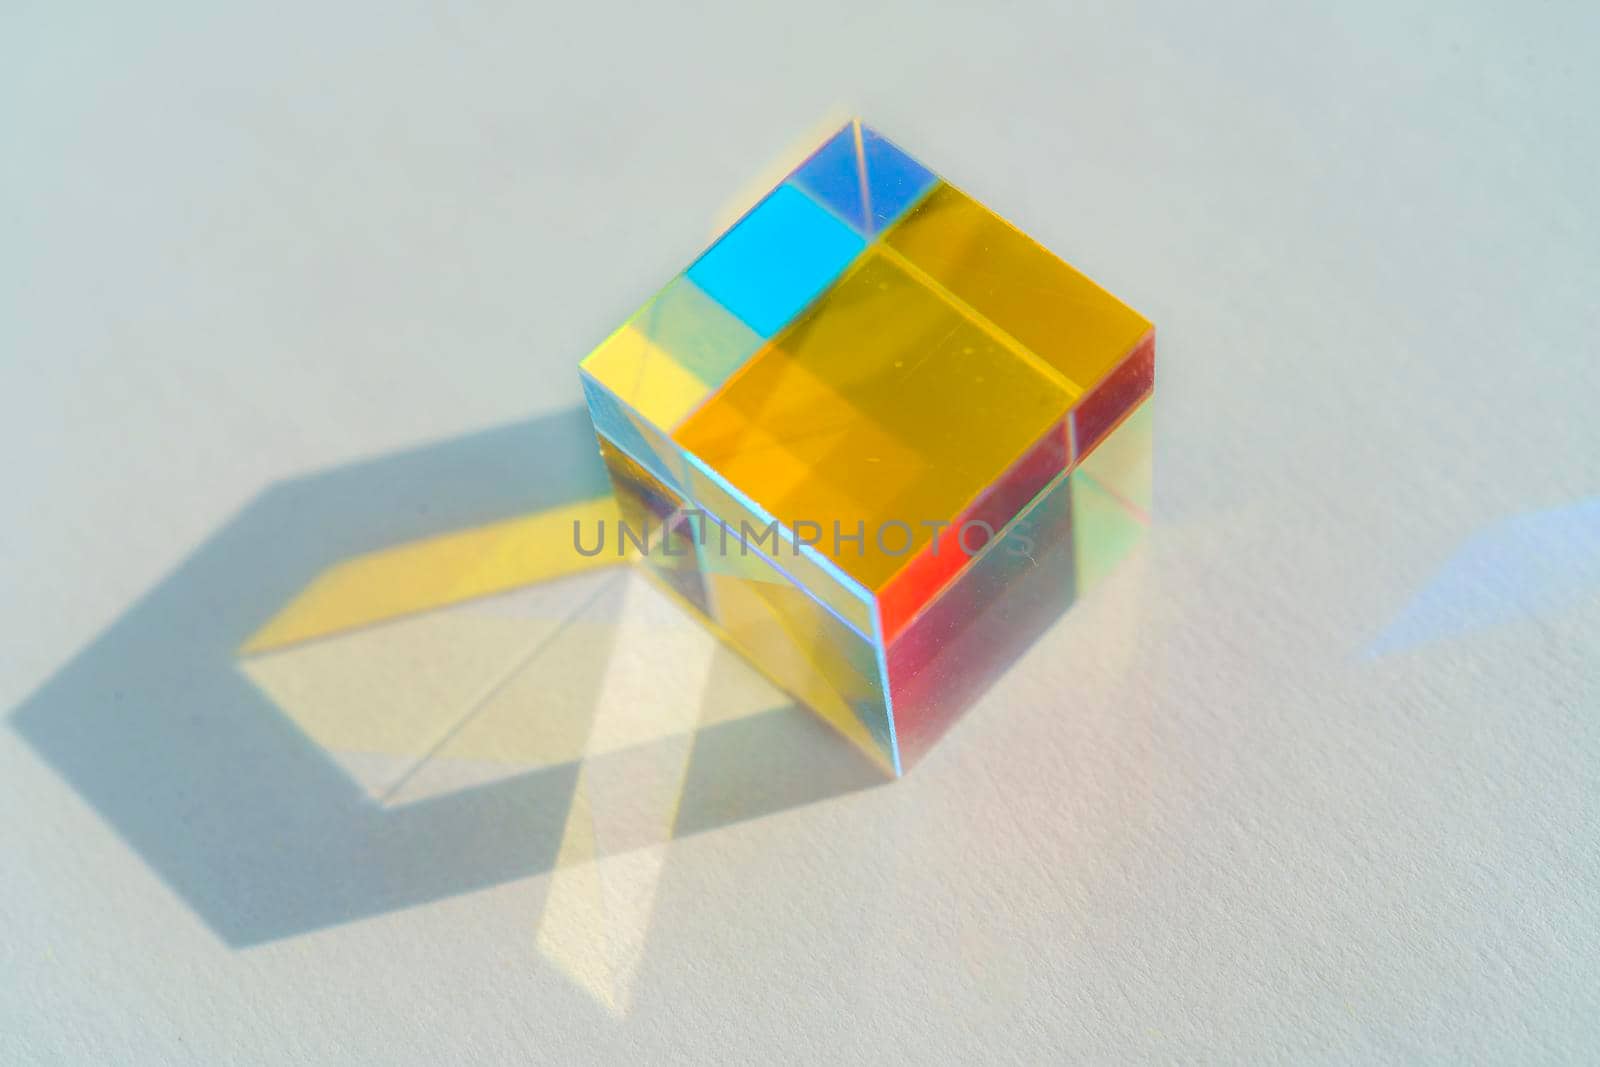 Cubic rainbow prism on a white background. by Vvicca